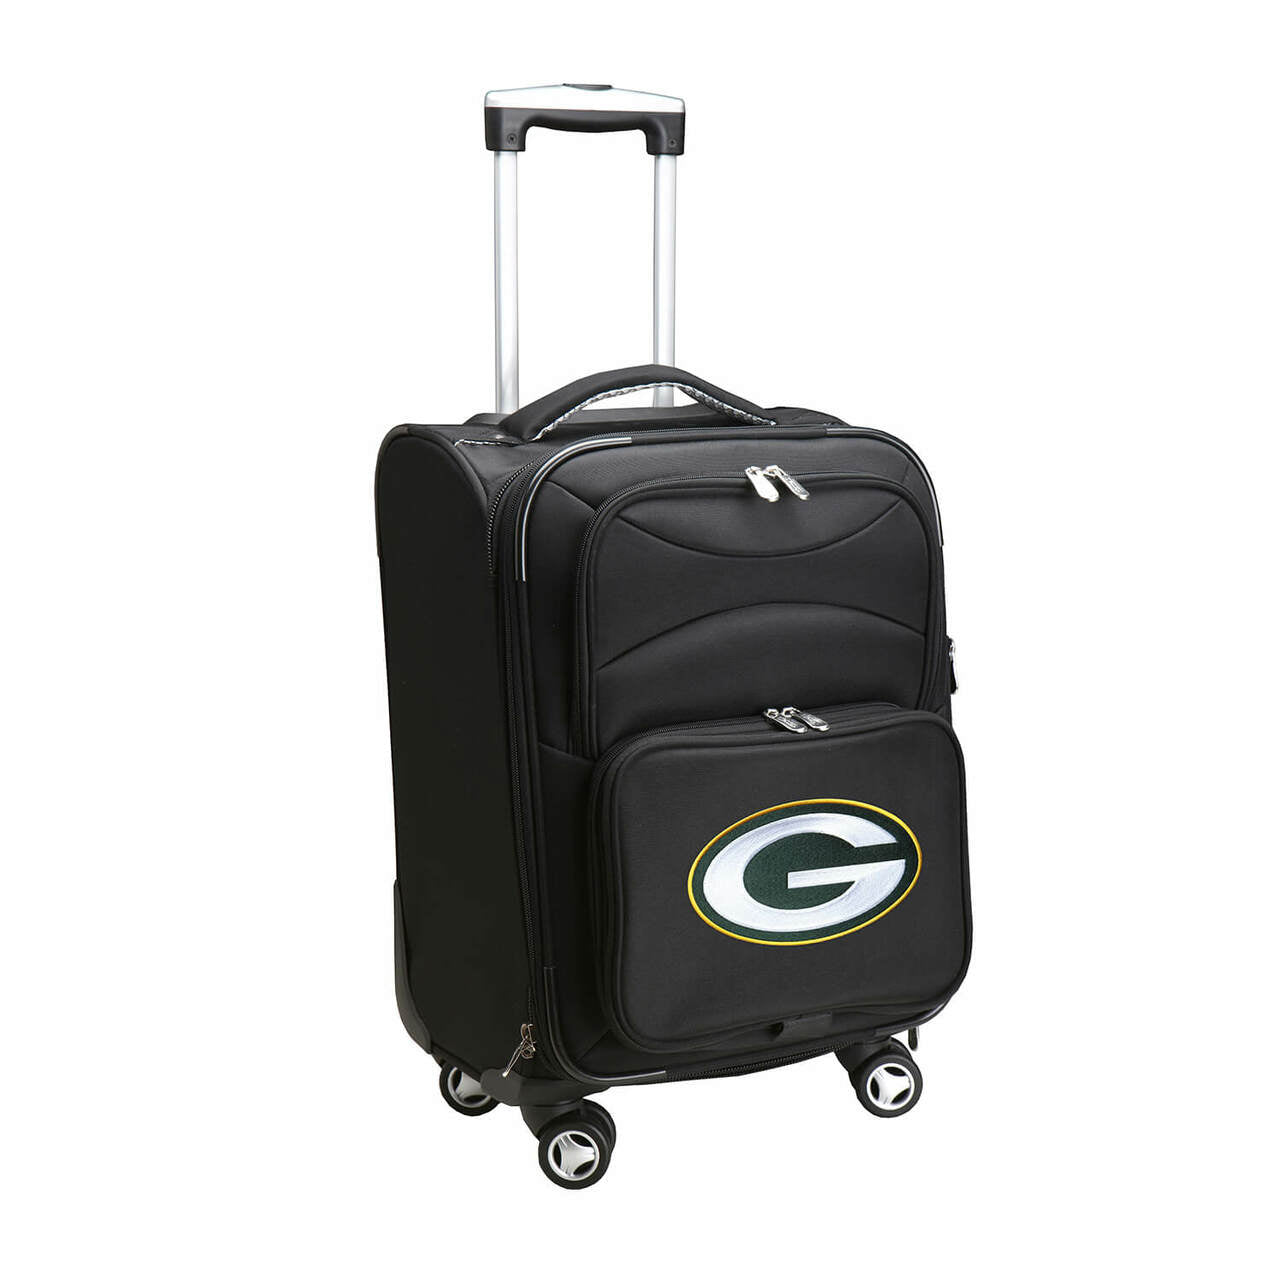 Green Bay Packers 21" Carry-on Spinner Luggage